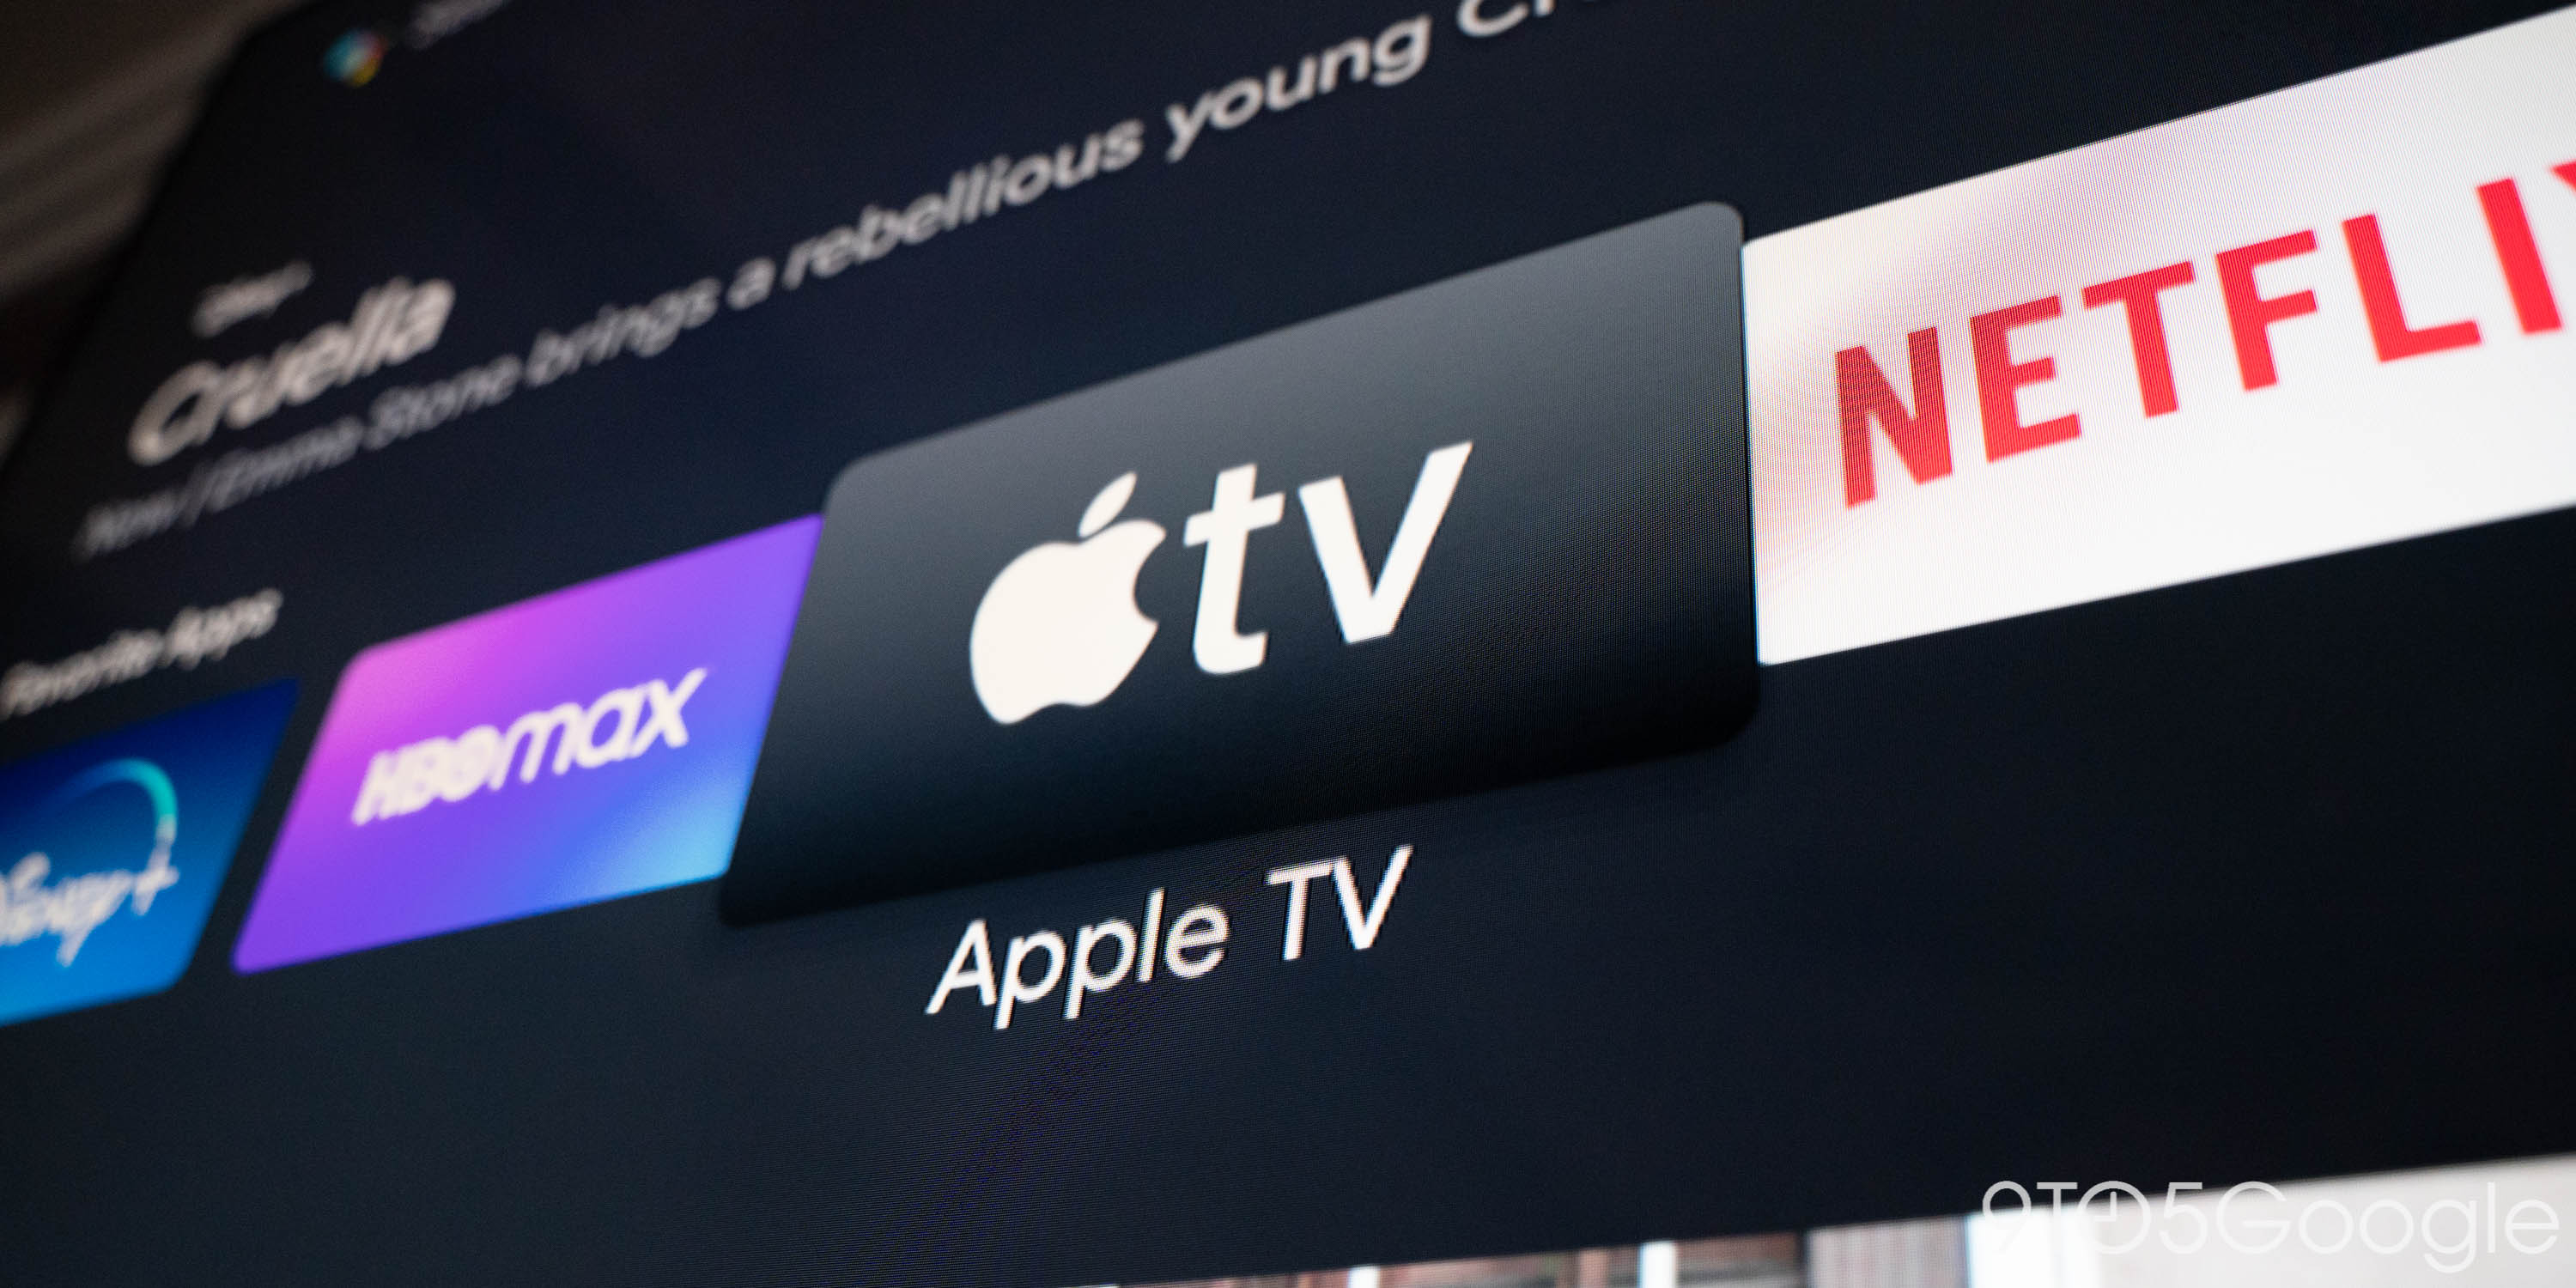 Interconnect Kviksølv købe Apple TV app can no longer buy content on Android TV - 9to5Google